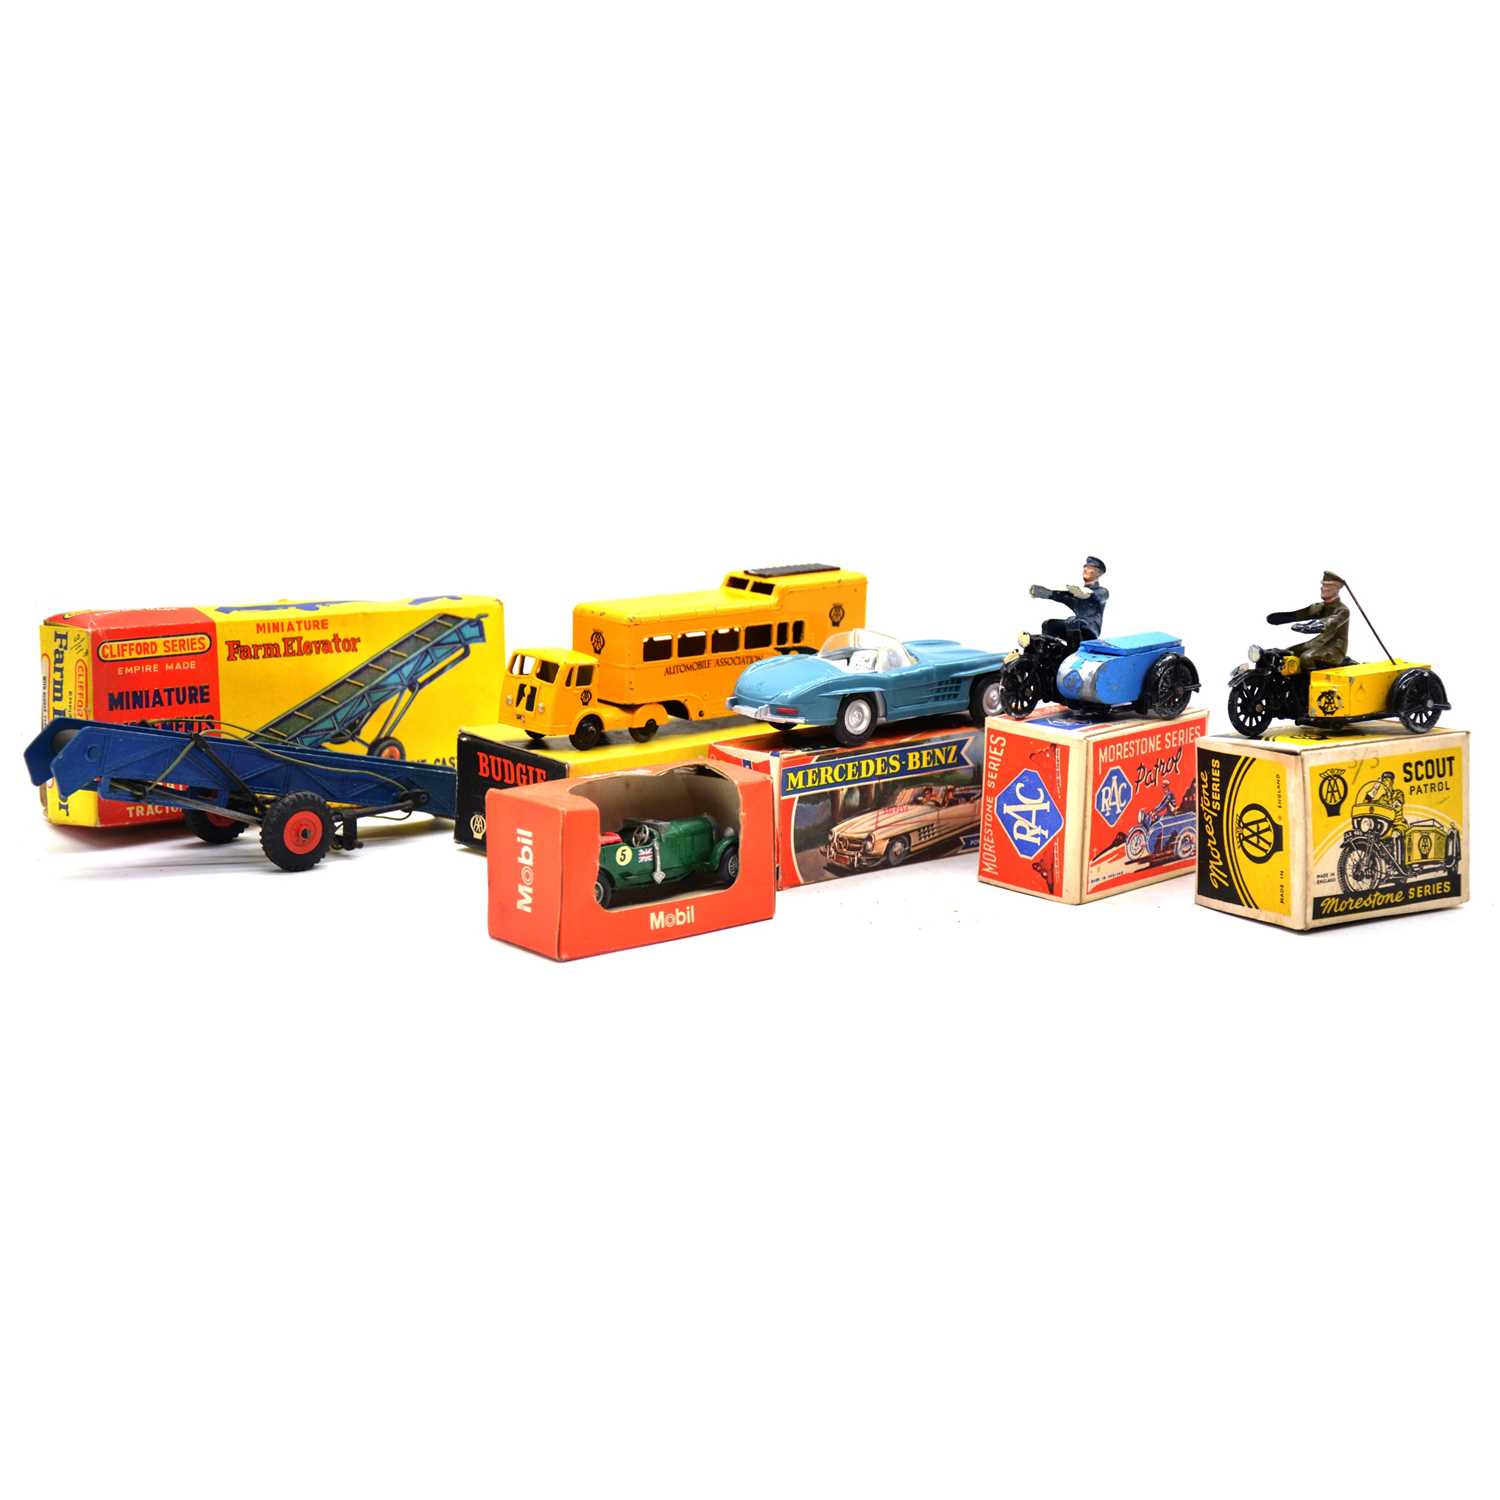 Six die-cast model vehicles, including Morestone, Clifford, Budgie and others